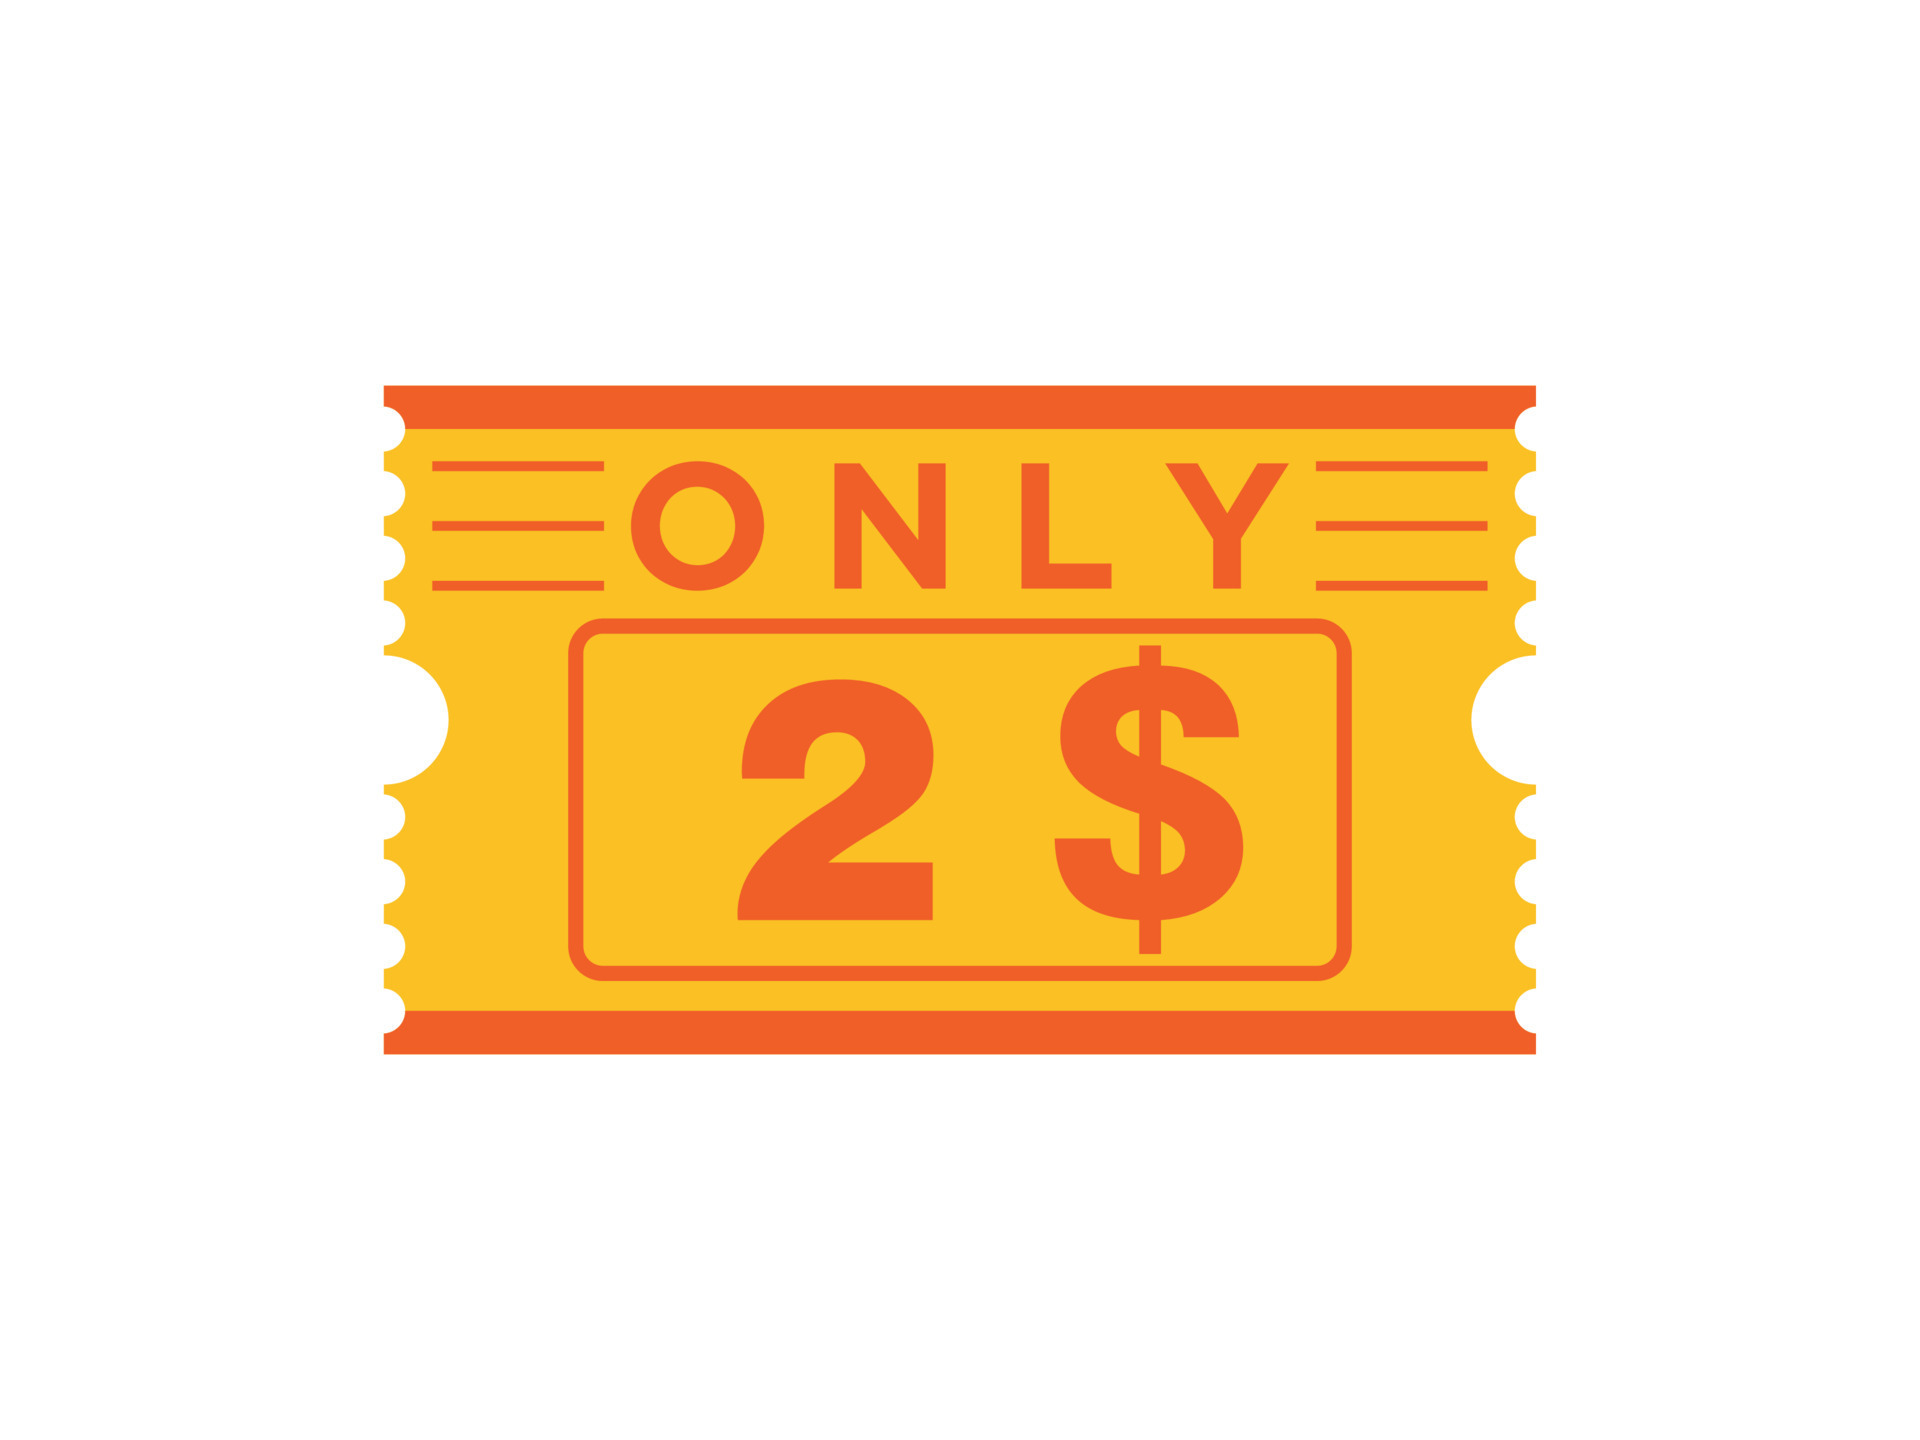 2 Dollar Only Coupon sign or Label or discount voucher Money